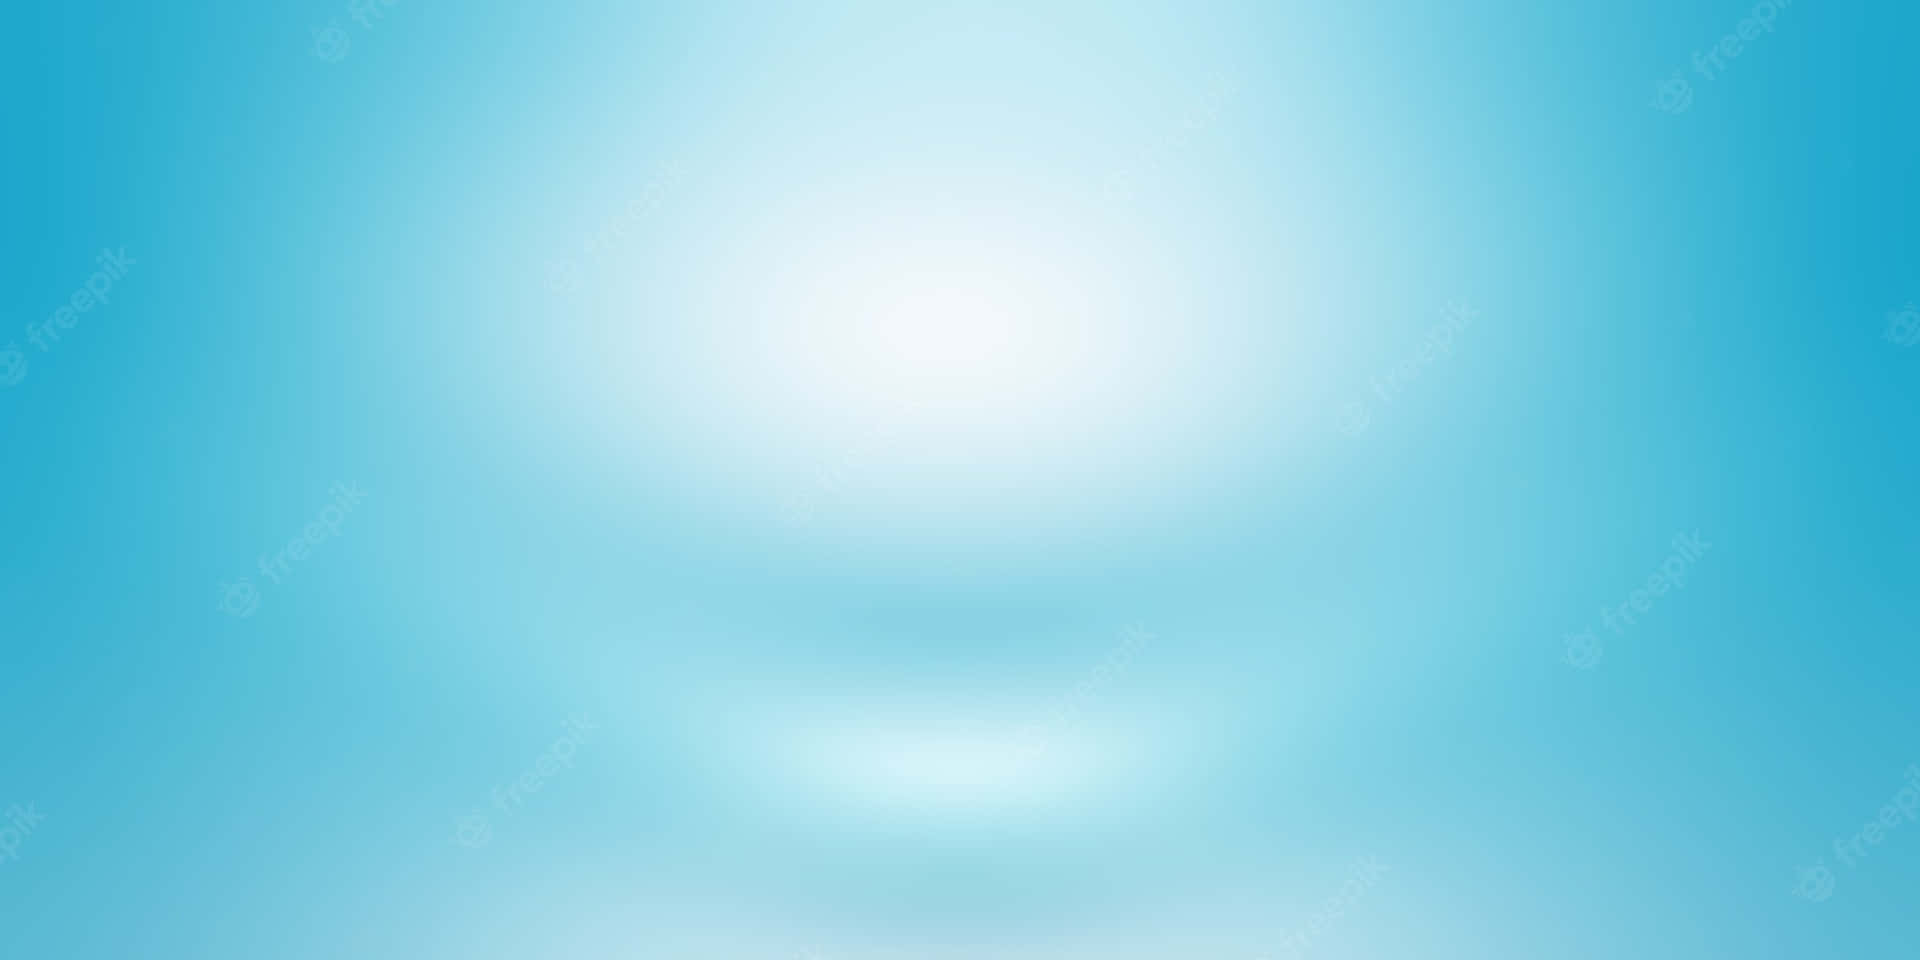 A cool, light blue background perfect for your desktop Wallpaper